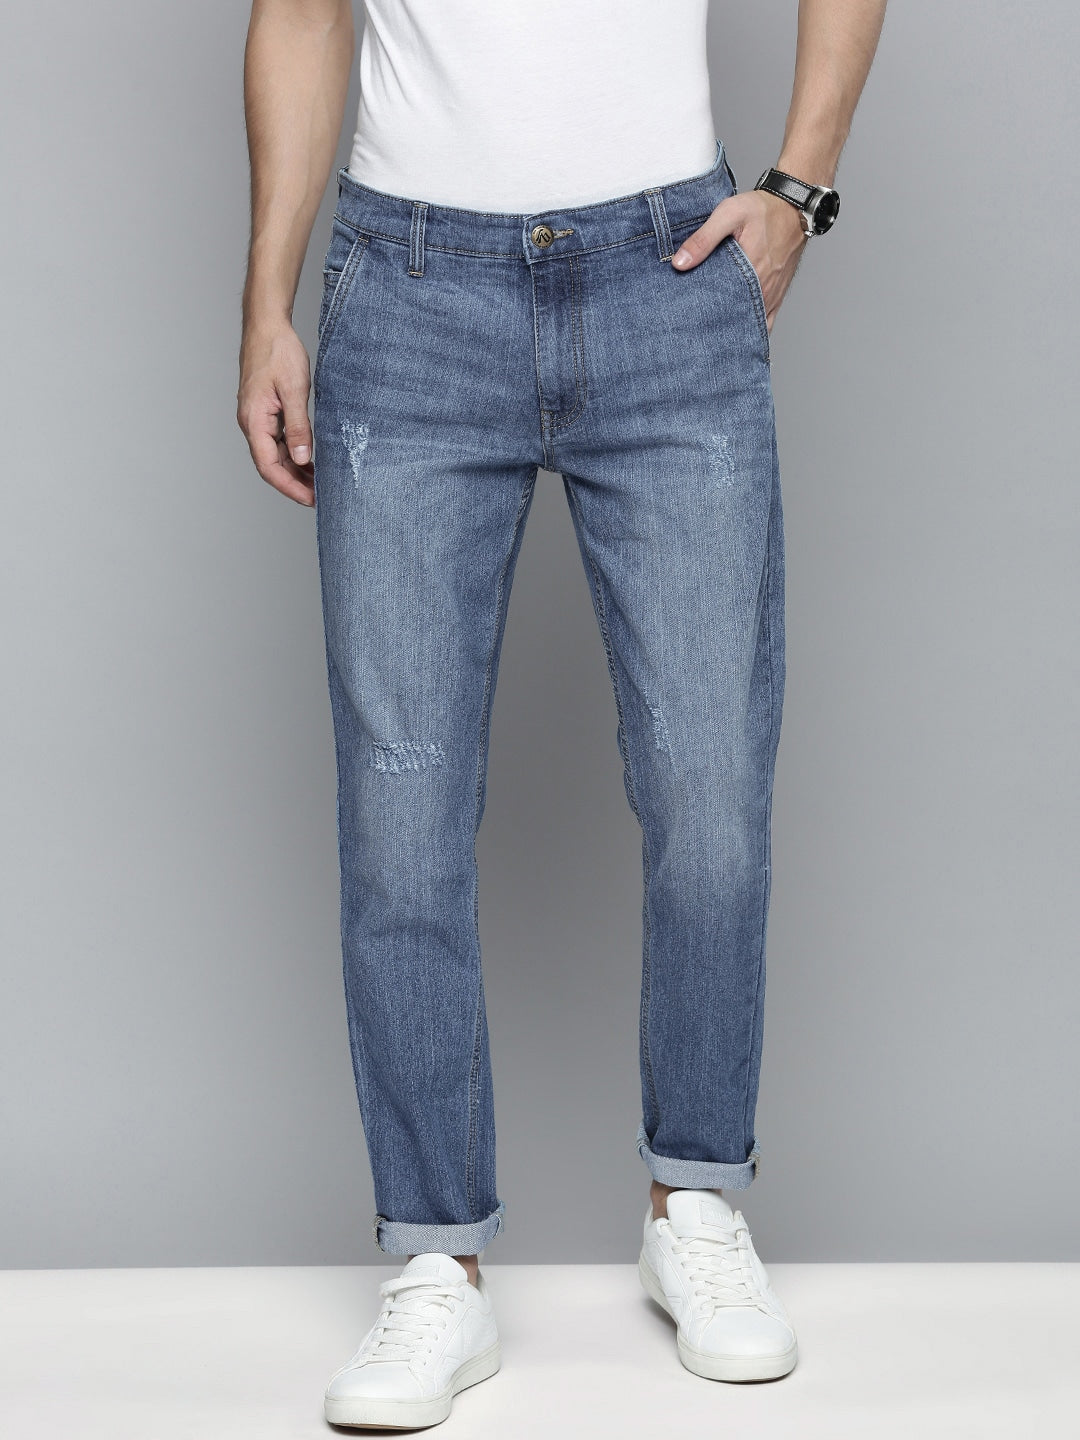 Blue Solid Jeans - 28 Blue